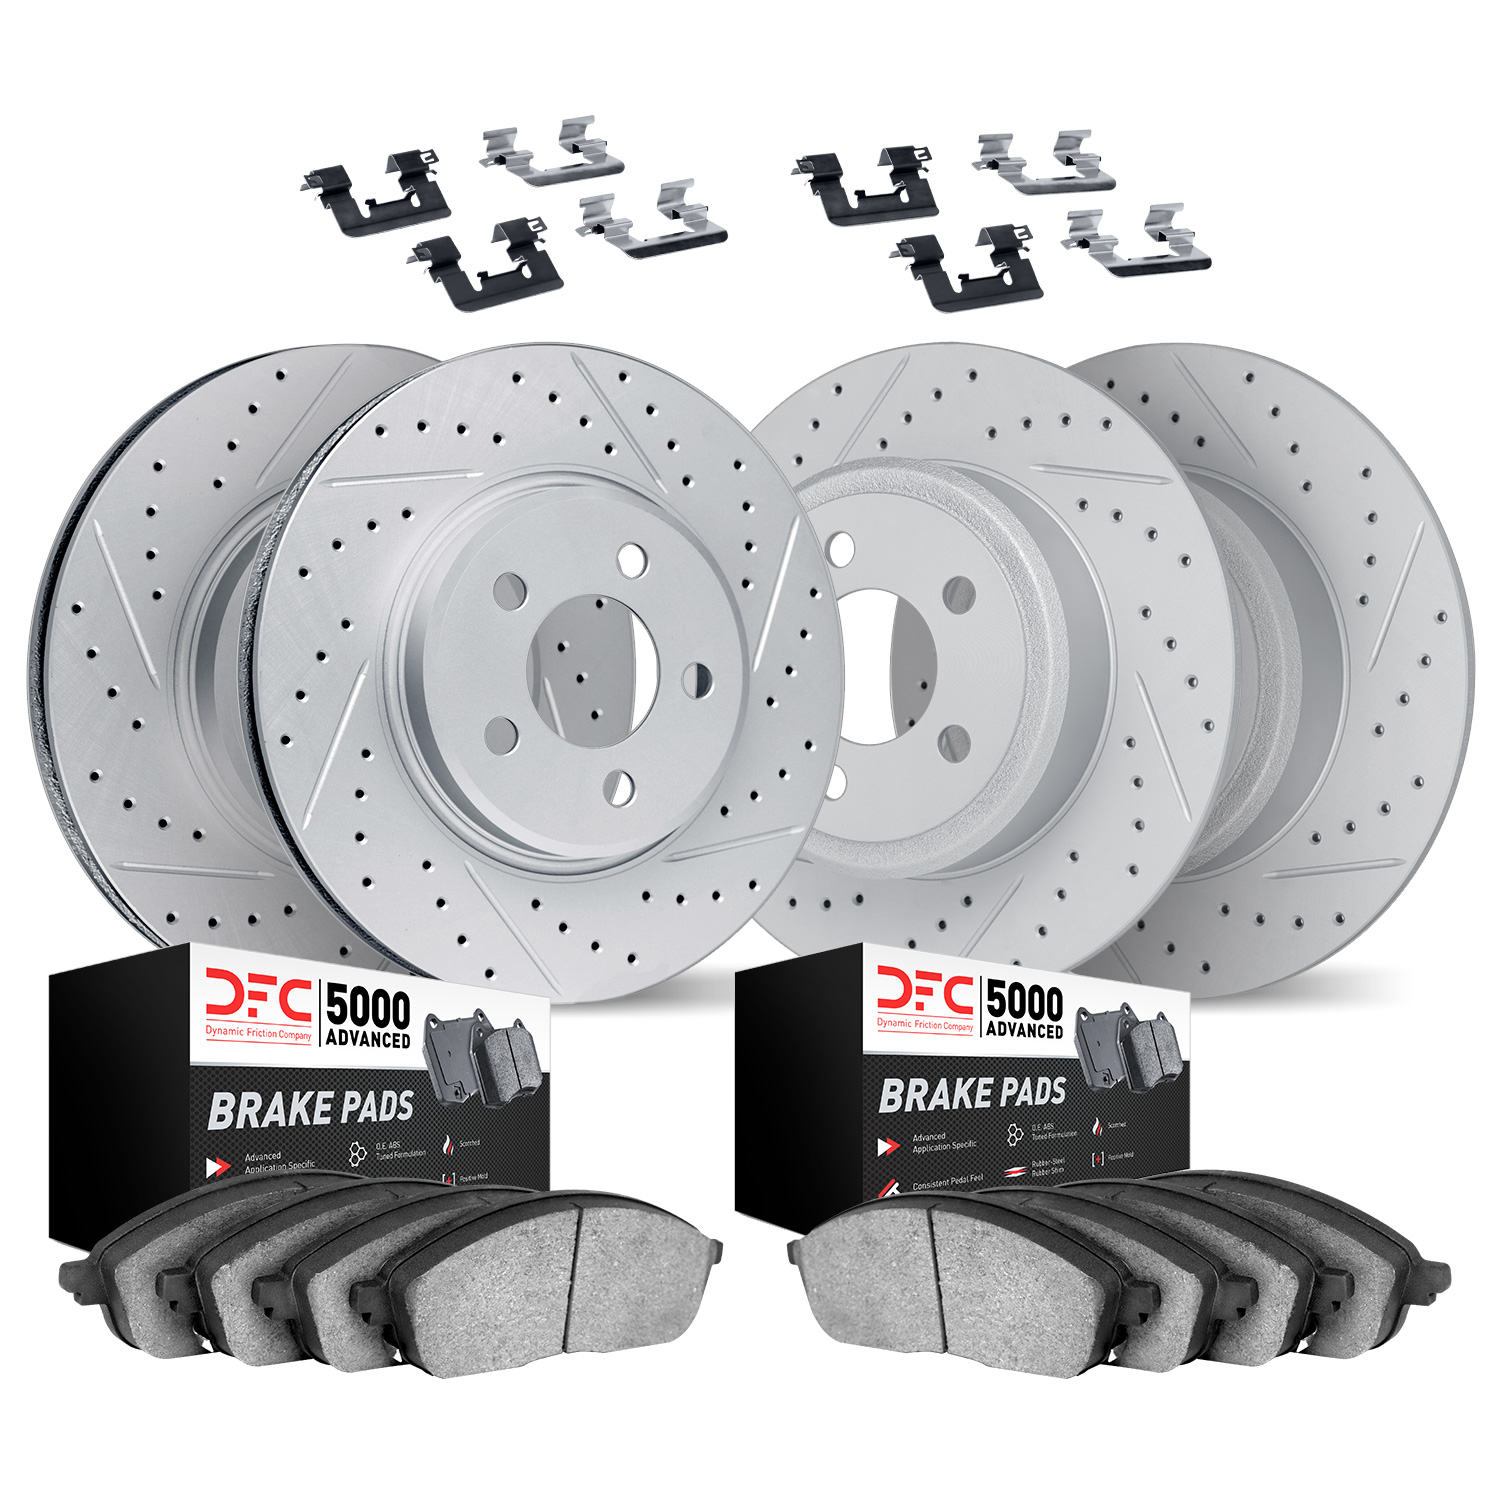 2514-42075 Geoperformance Drilled/Slotted Rotors w/5000 Advanced Brake Pads Kit & Hardware, 2014-2014 Mopar, Position: Front and